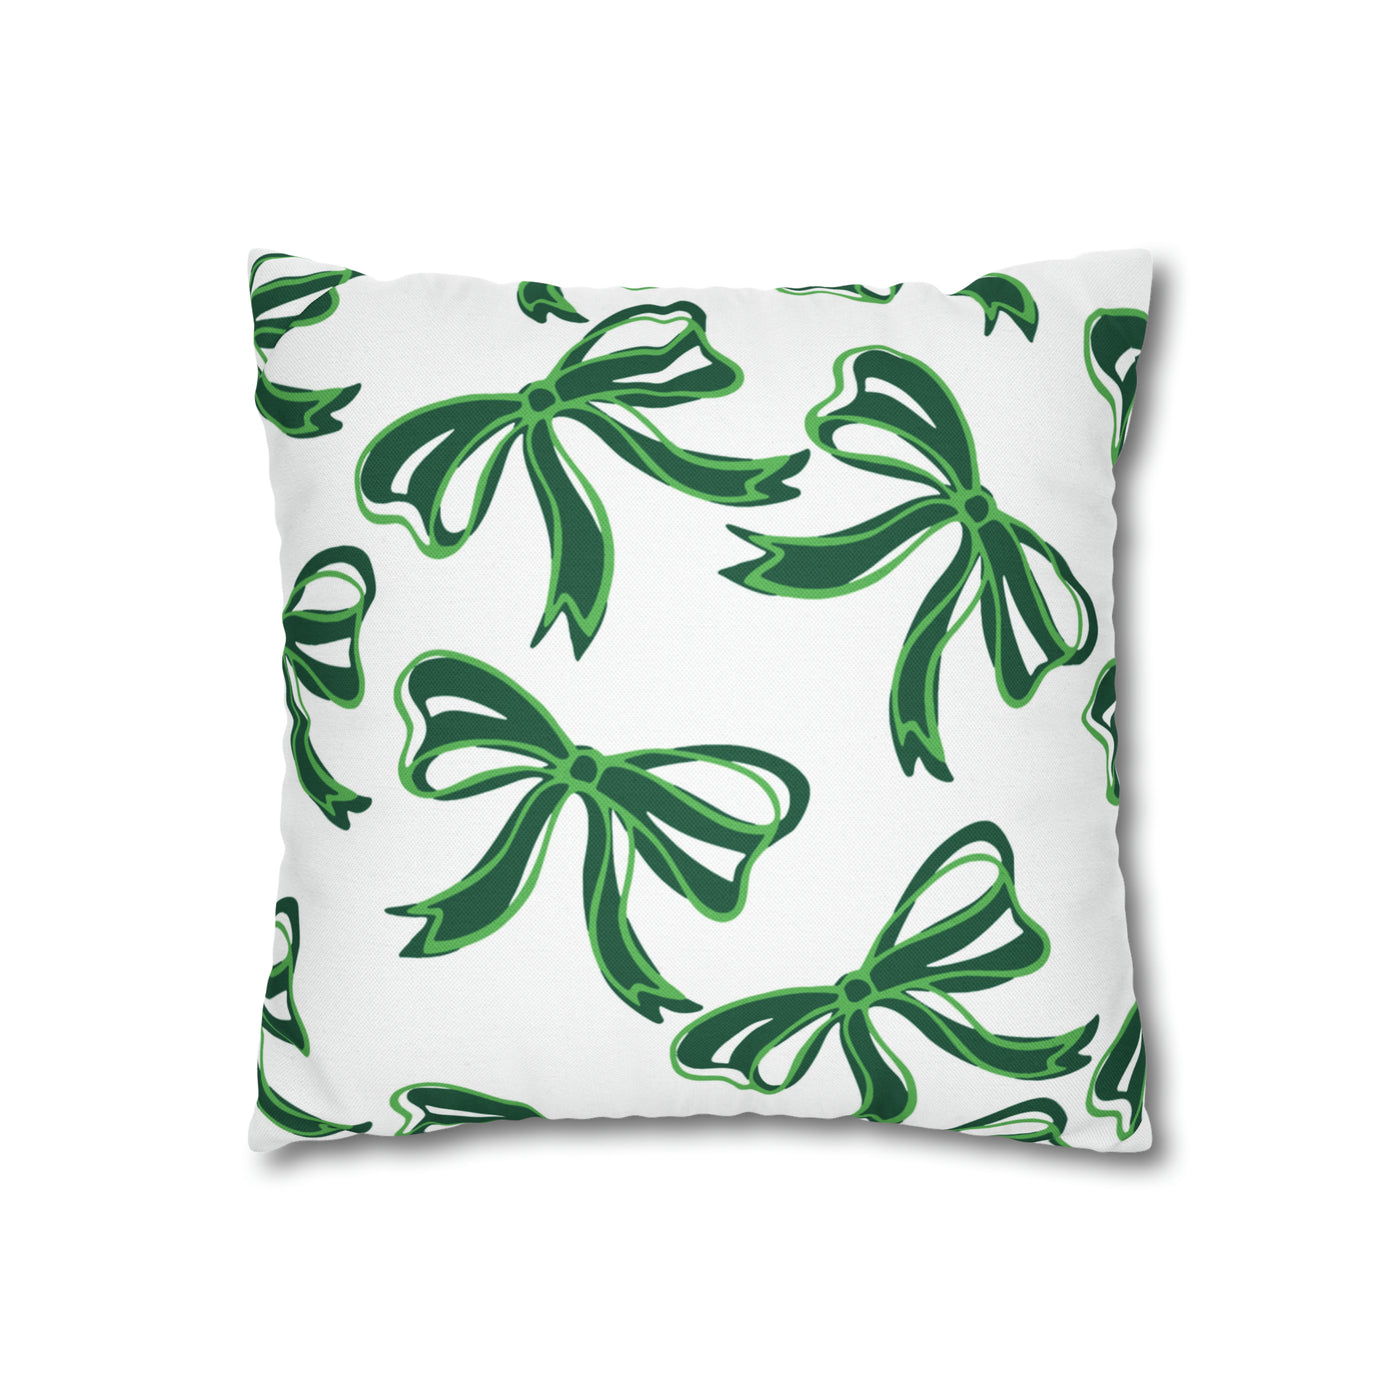 Trendy Bow College Pillow Cover - Dorm Pillow,Graduation Gift,Bed Party Gift,Acceptance Gift,College Gift, Binghamton Bearcats, BING